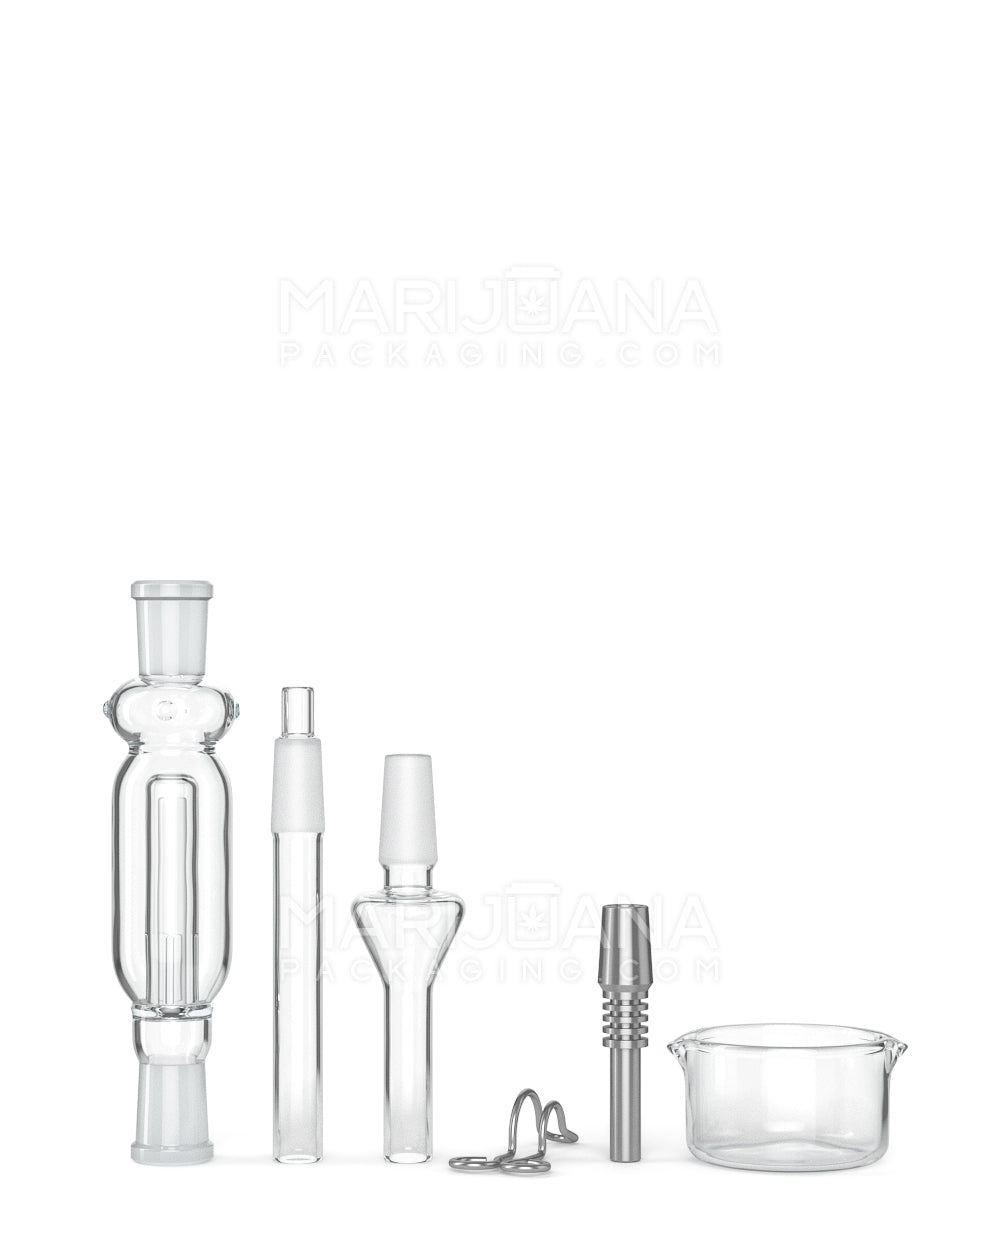 Mini Nectar Collector Colorful With 6 Inch Nector Collector Glass Dab Straw  Straigh Dab Tube Smoking Accessories Glass Pipe Dab Rig Oil From  Silicone_bong, $2.15